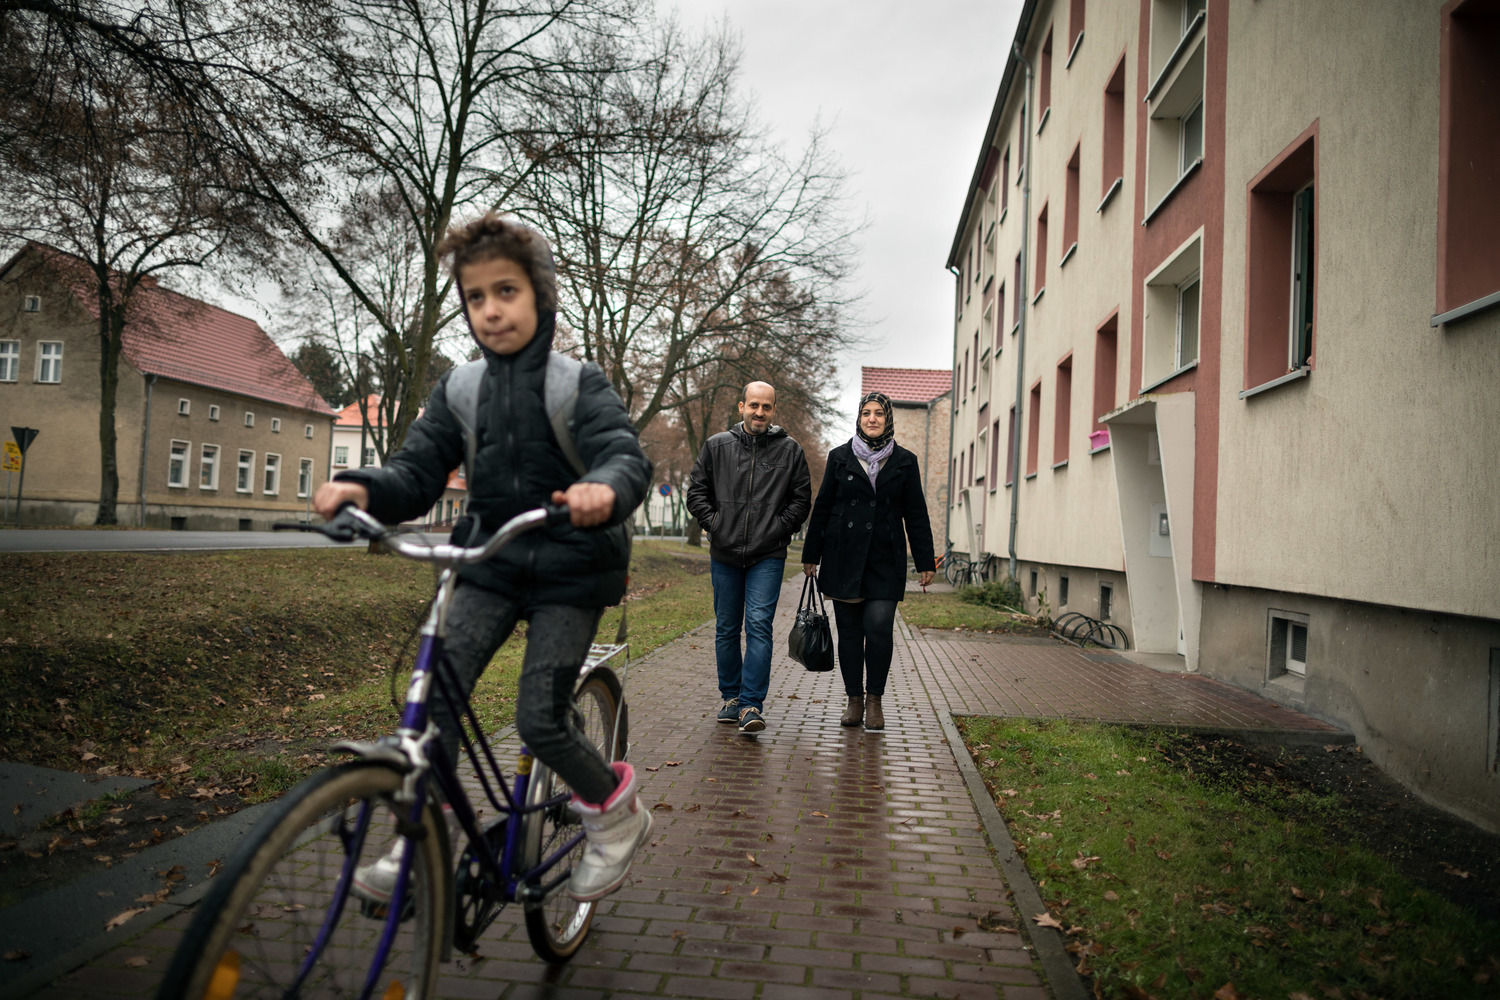 Germany. A Syrian family fled the war and started successfully a new life in a tiny village on the German-Polish border.